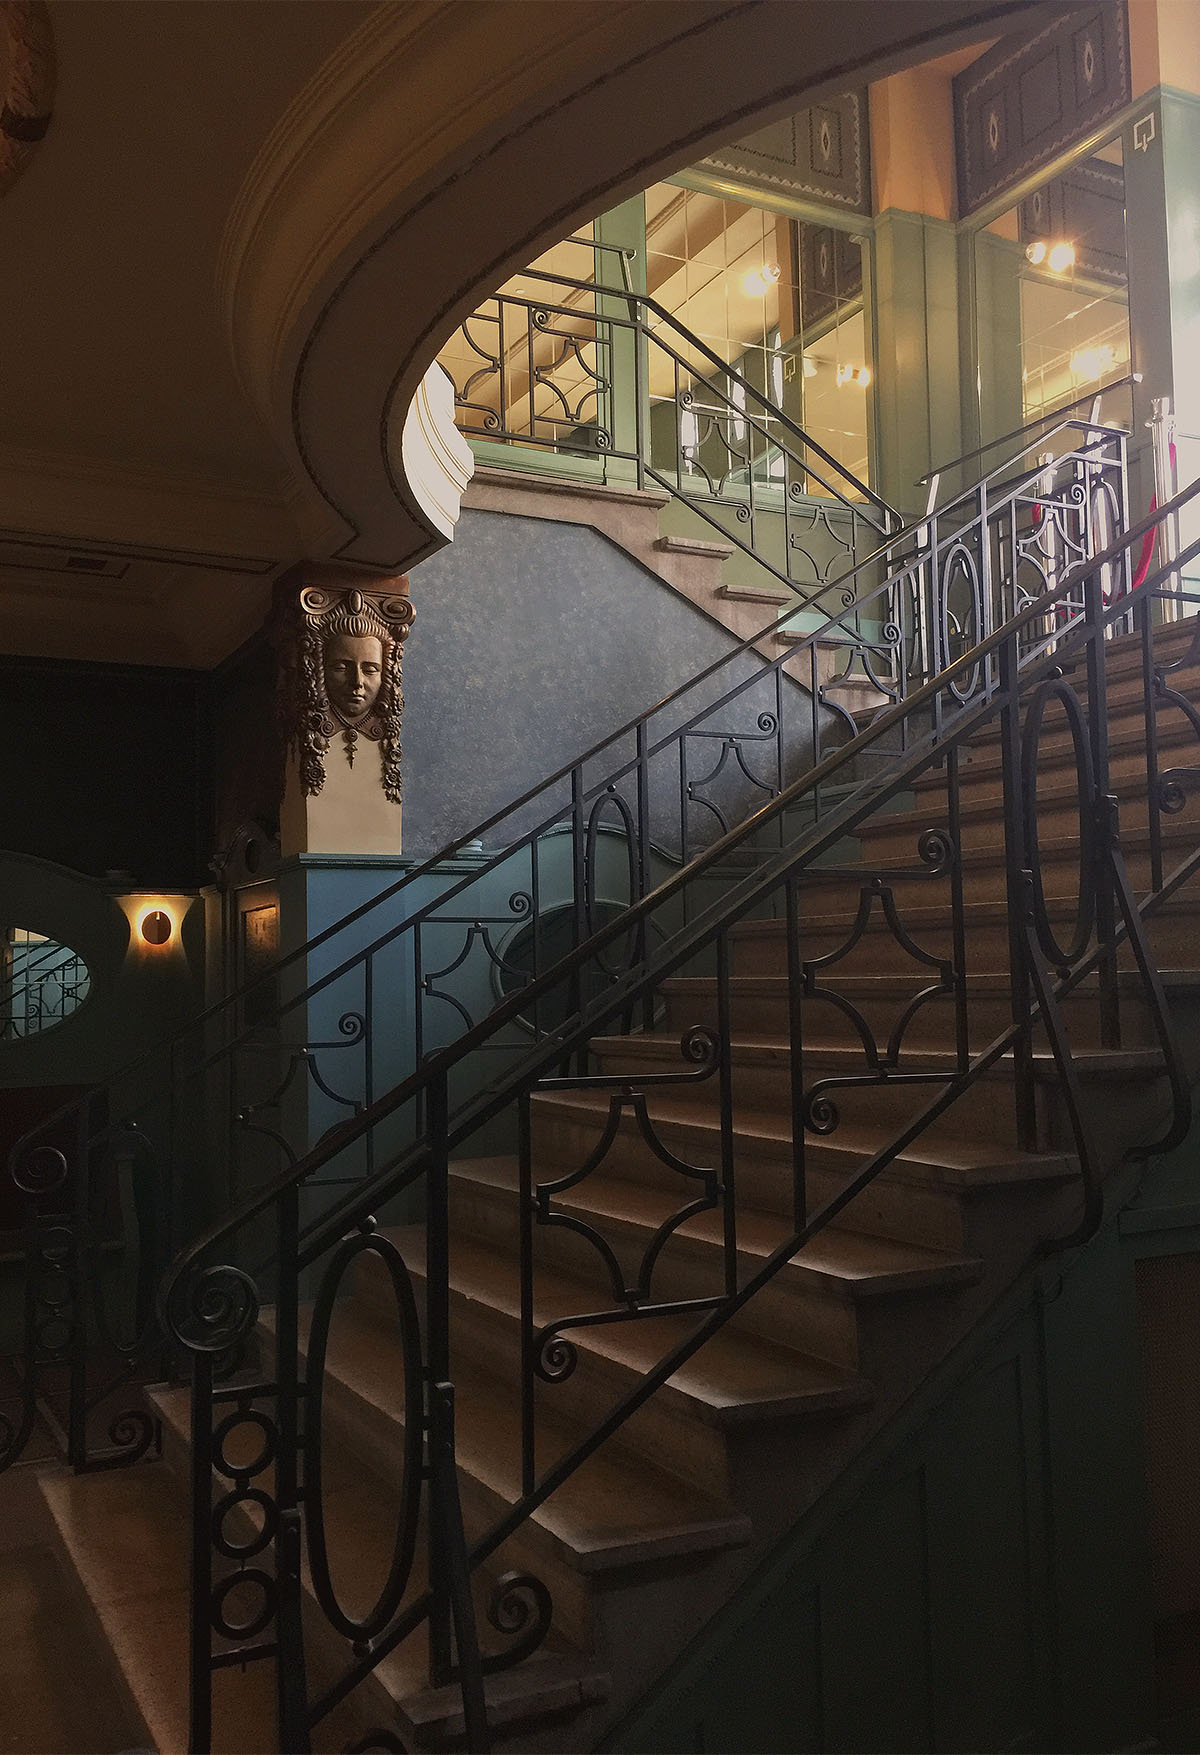 The original art nouveau foyer of the Pathé Palace in Brussels